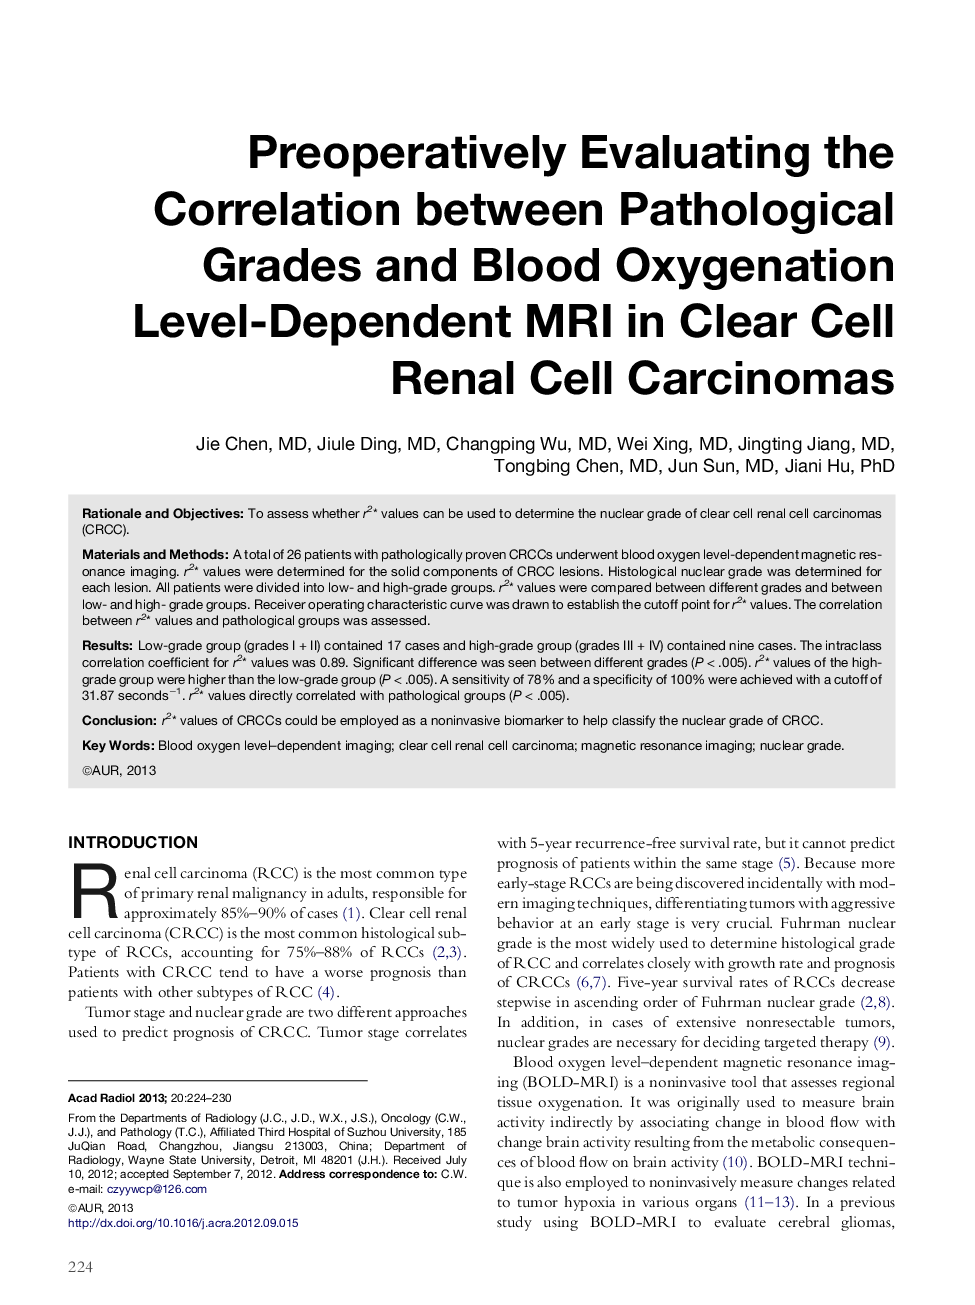 Preoperatively Evaluating the Correlation between Pathological Grades and Blood Oxygenation Level-Dependent MRI in Clear Cell Renal Cell Carcinomas